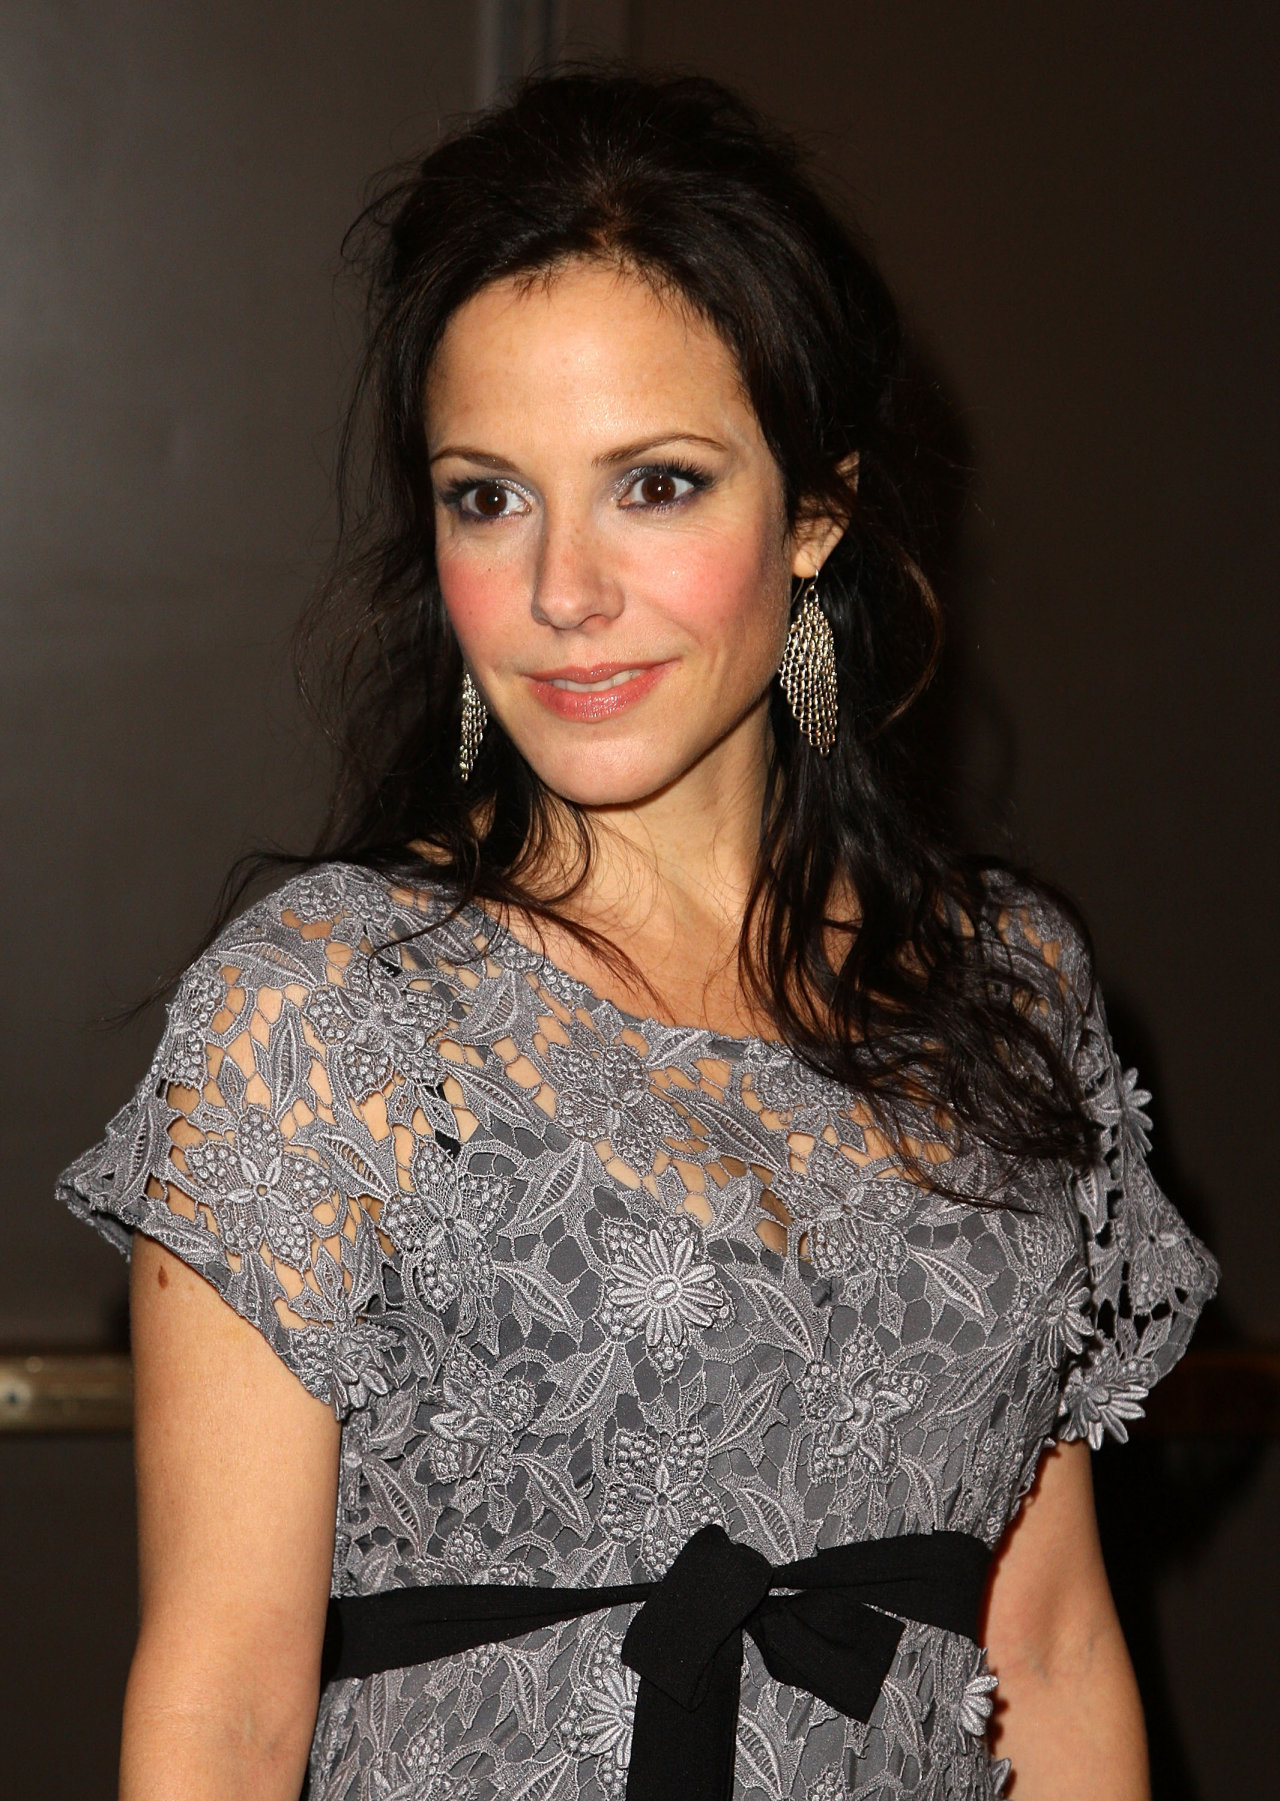 Mary-Louise Parker leaked wallpapers